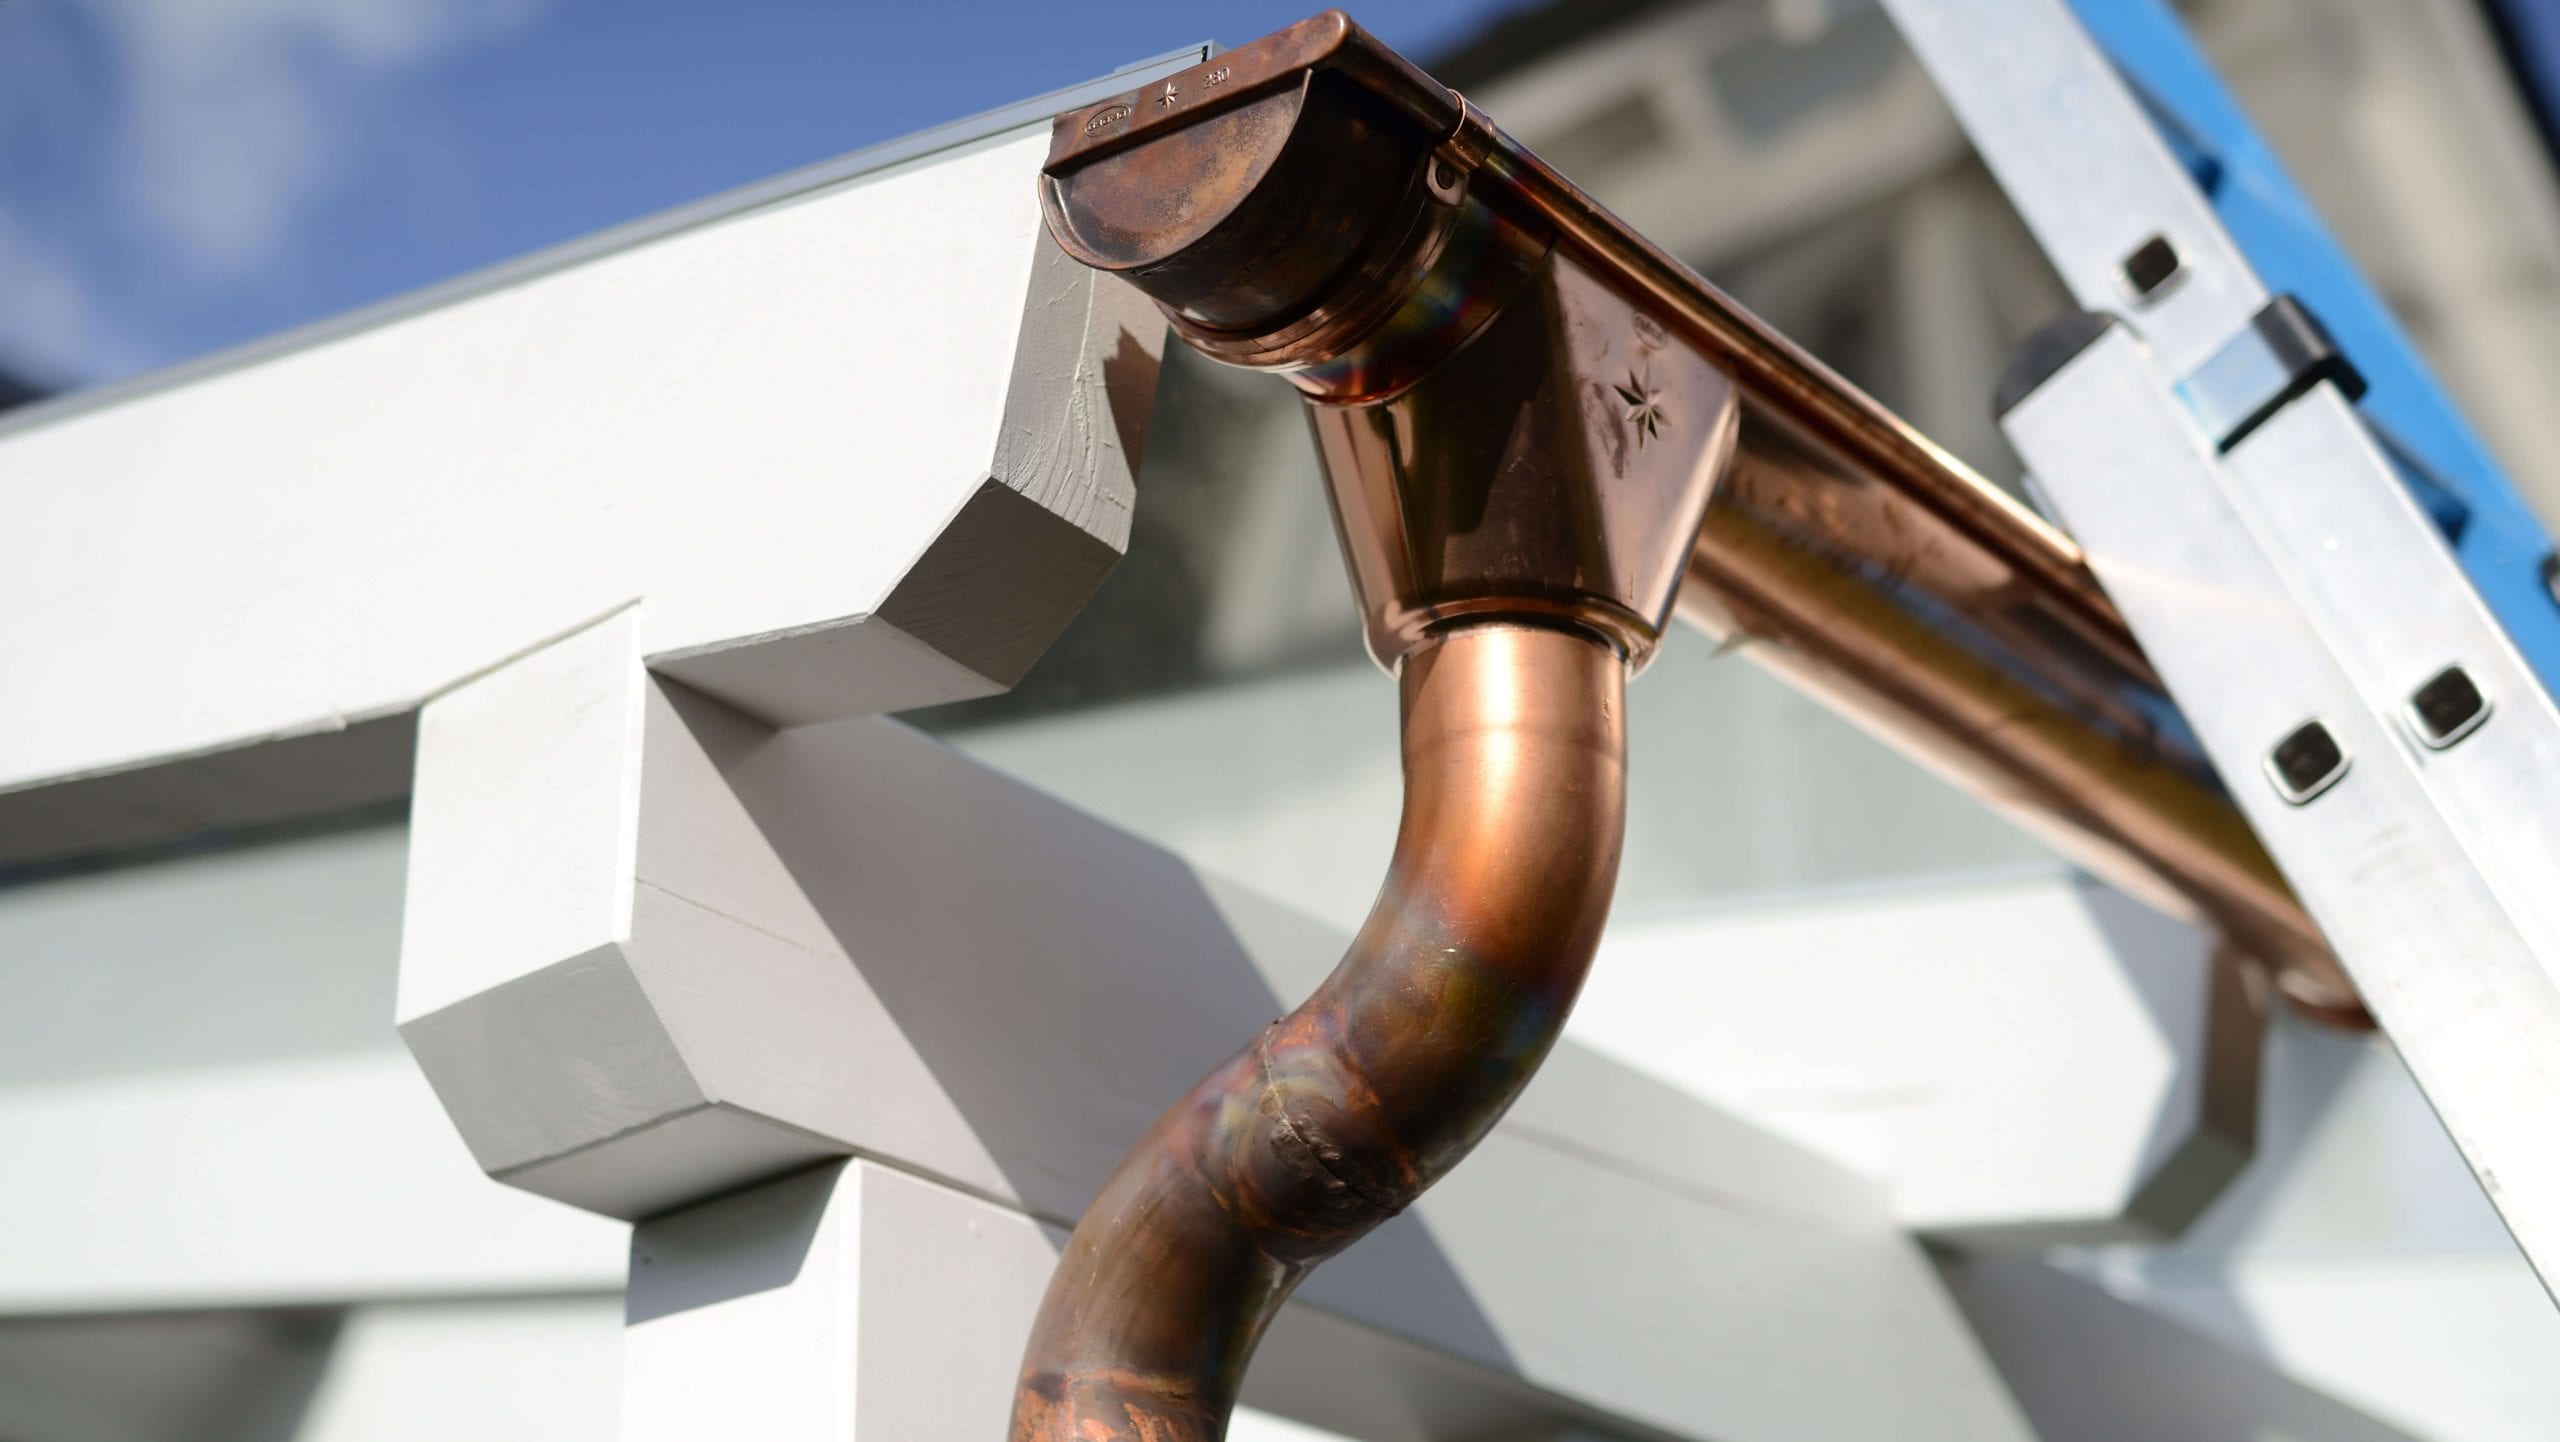 Make your property stand out with copper gutters. Contact for gutter installation in Spokane